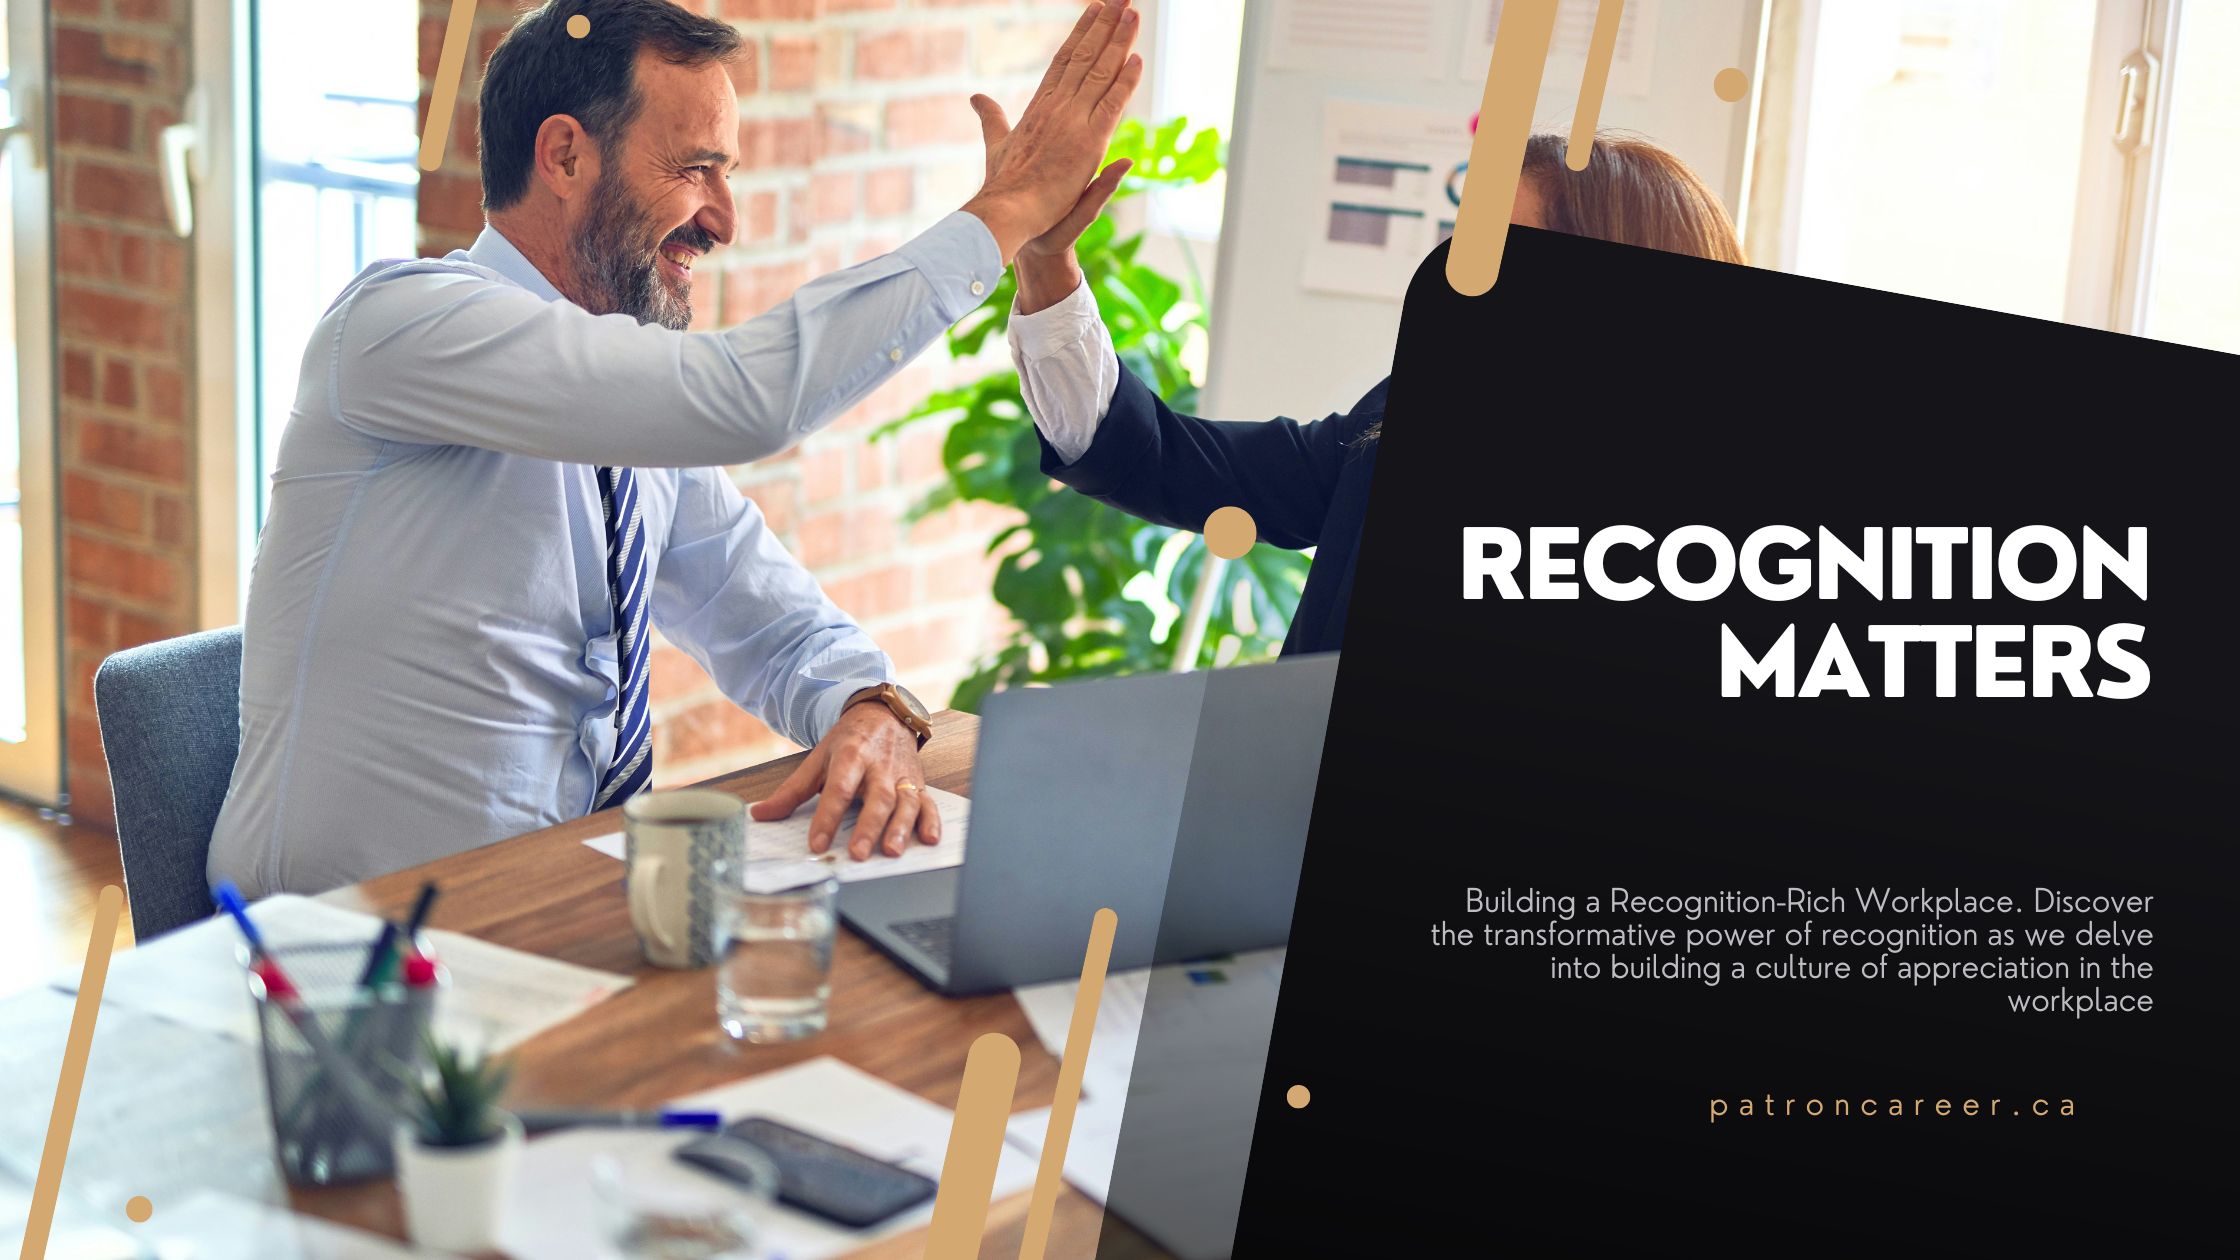 6 Ways to Build a Culture of Recognition at Work